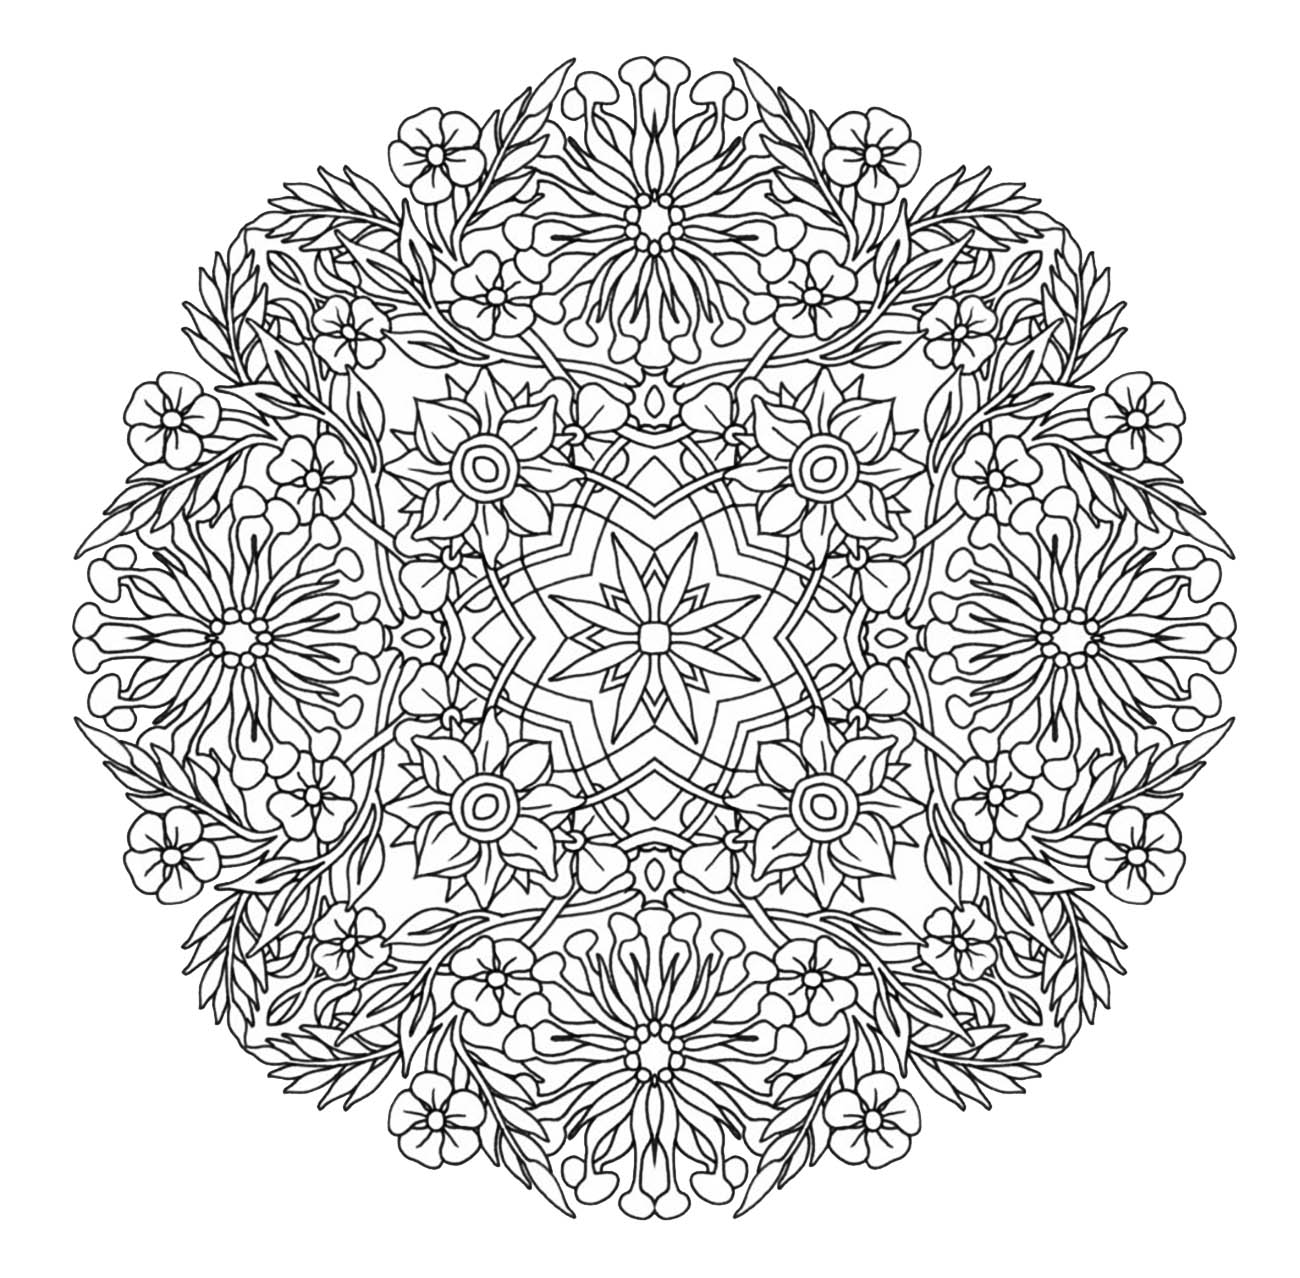 Mandala to download in pdf - 9 - Image with : , 